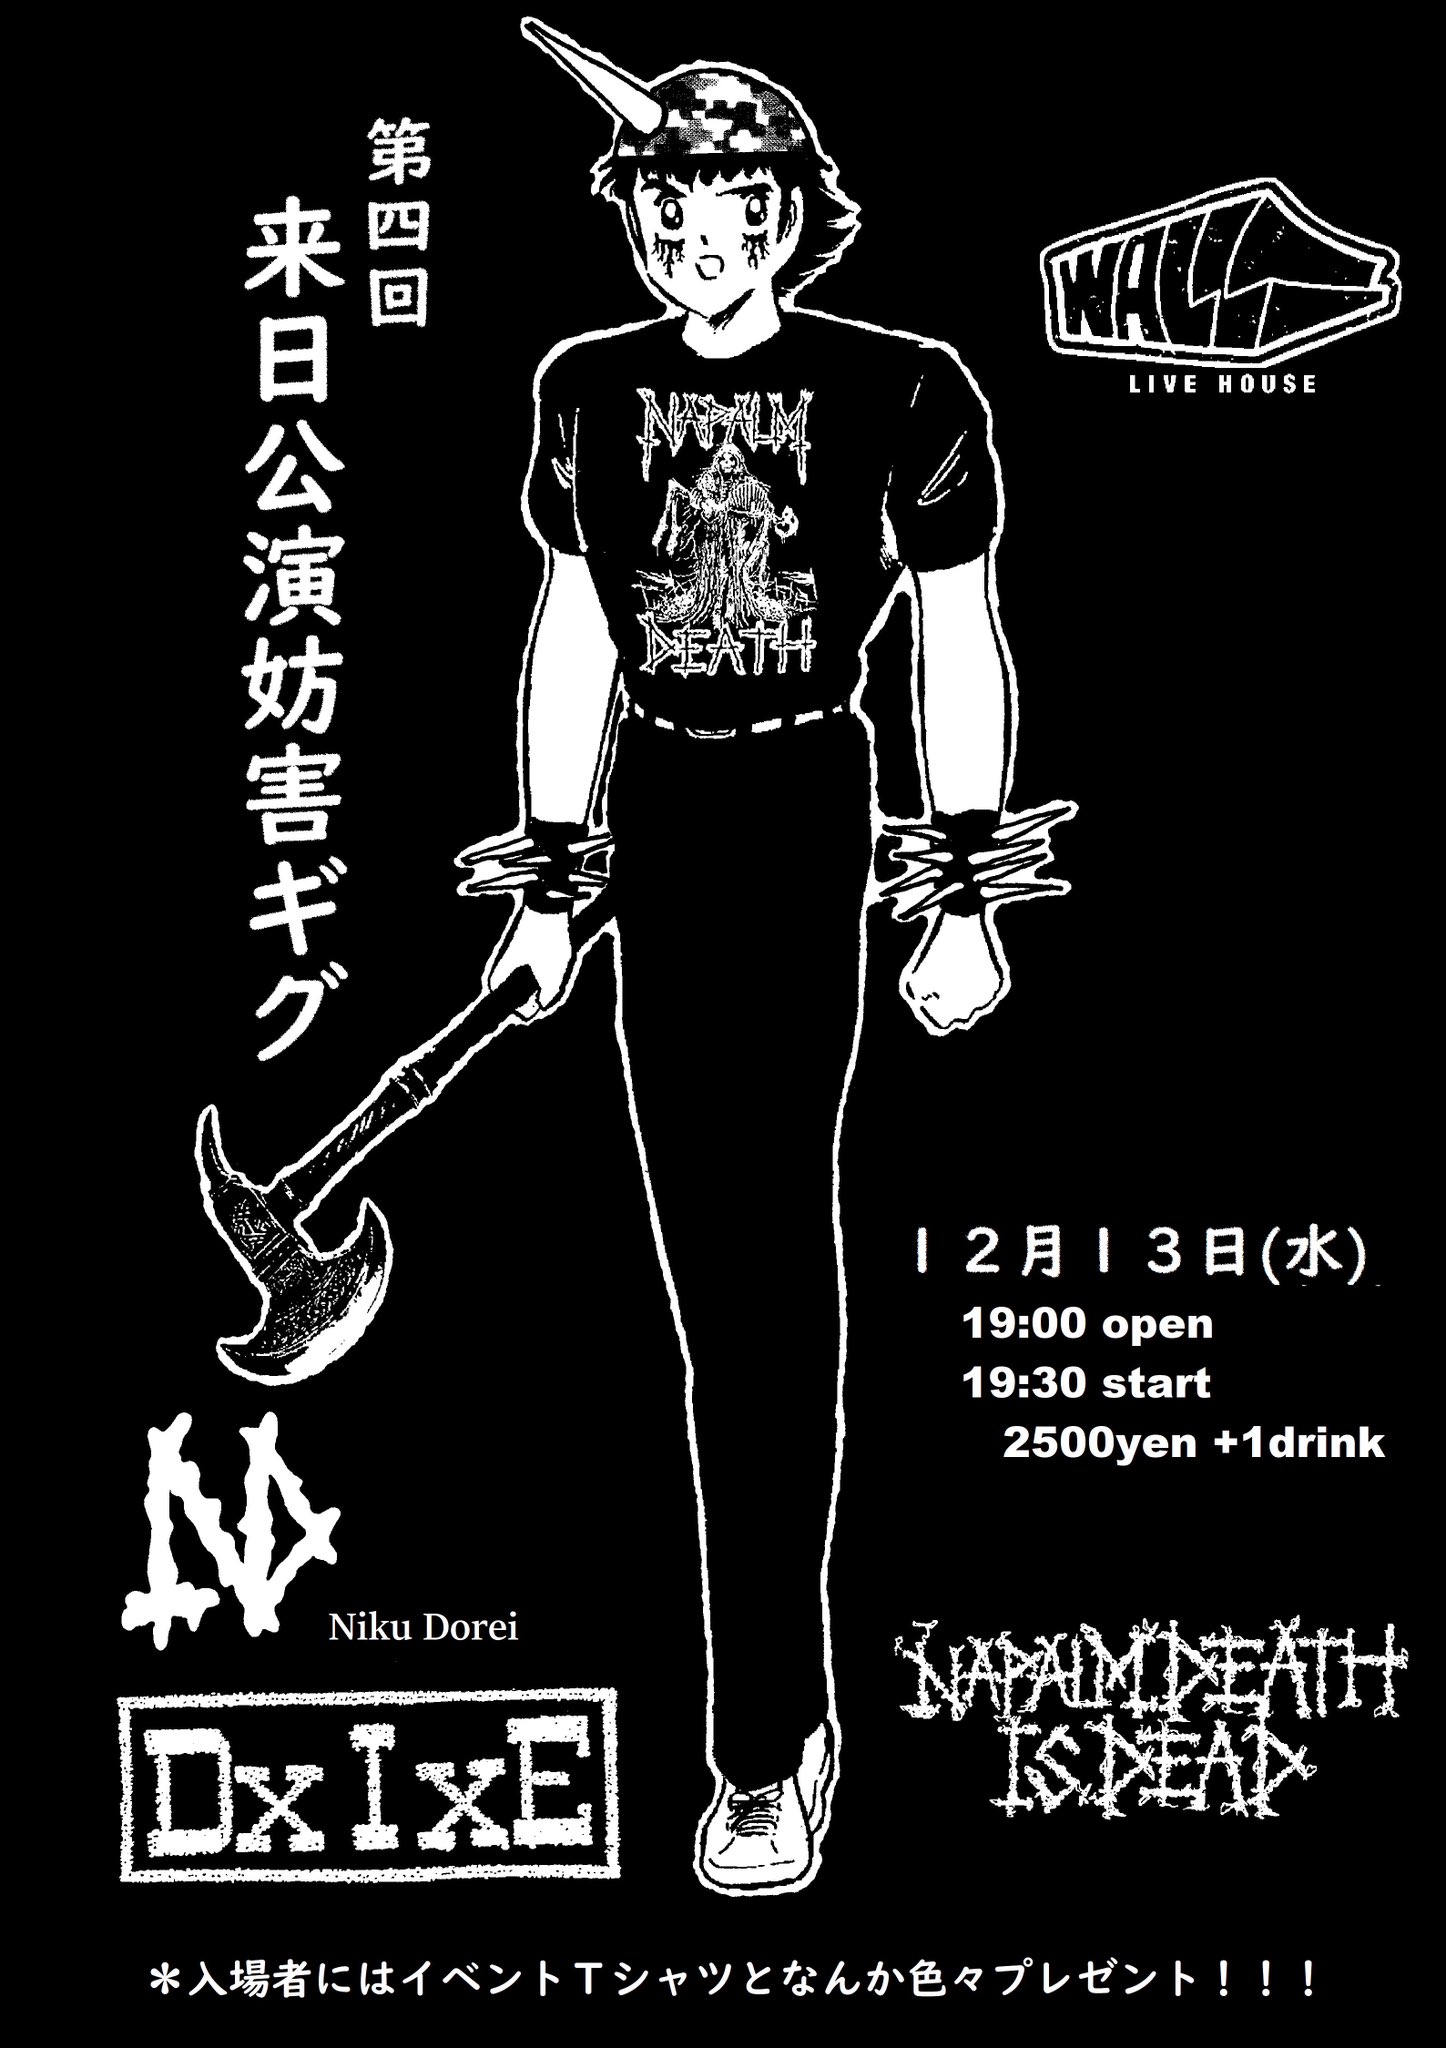 “Nothing to Hear vol.8” 〜Napalm Death来日公演妨害ＧＩＧ〜